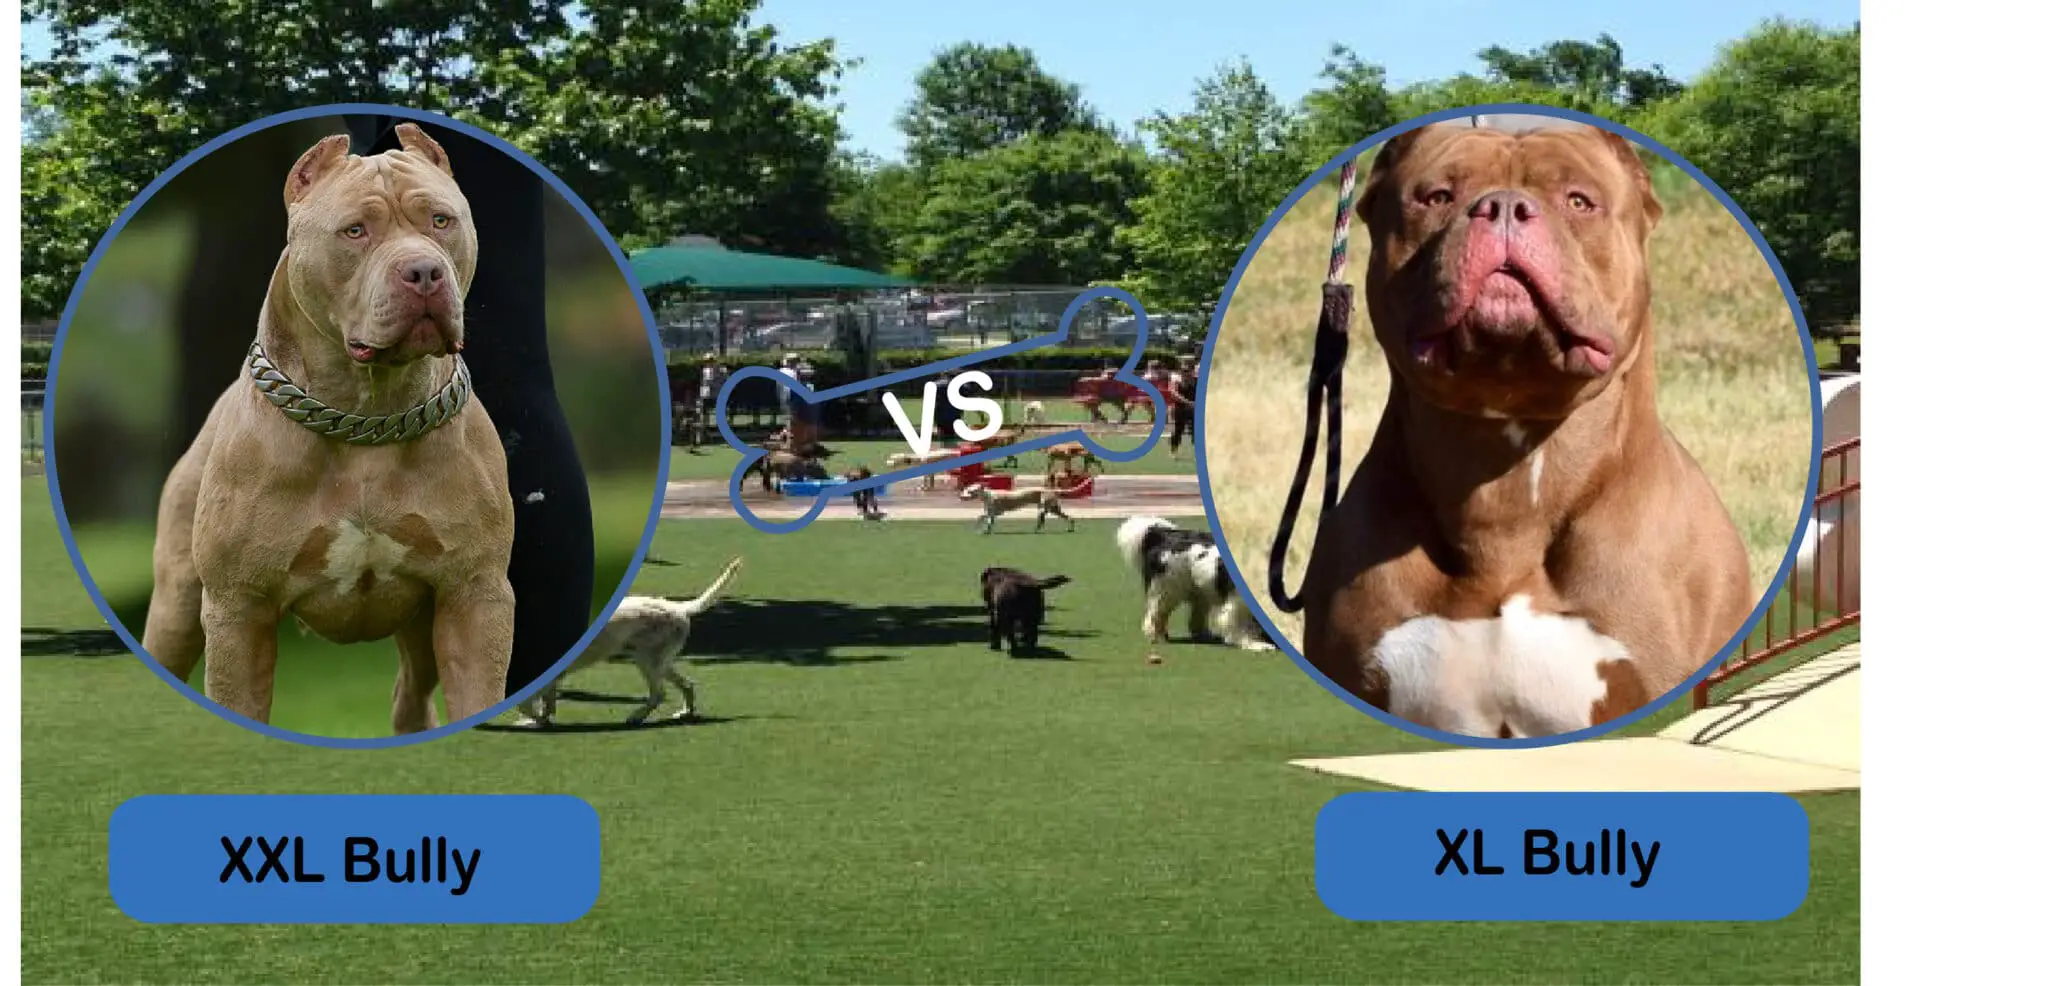 Debate: Which is Better, XXL Bully or XL Bully?